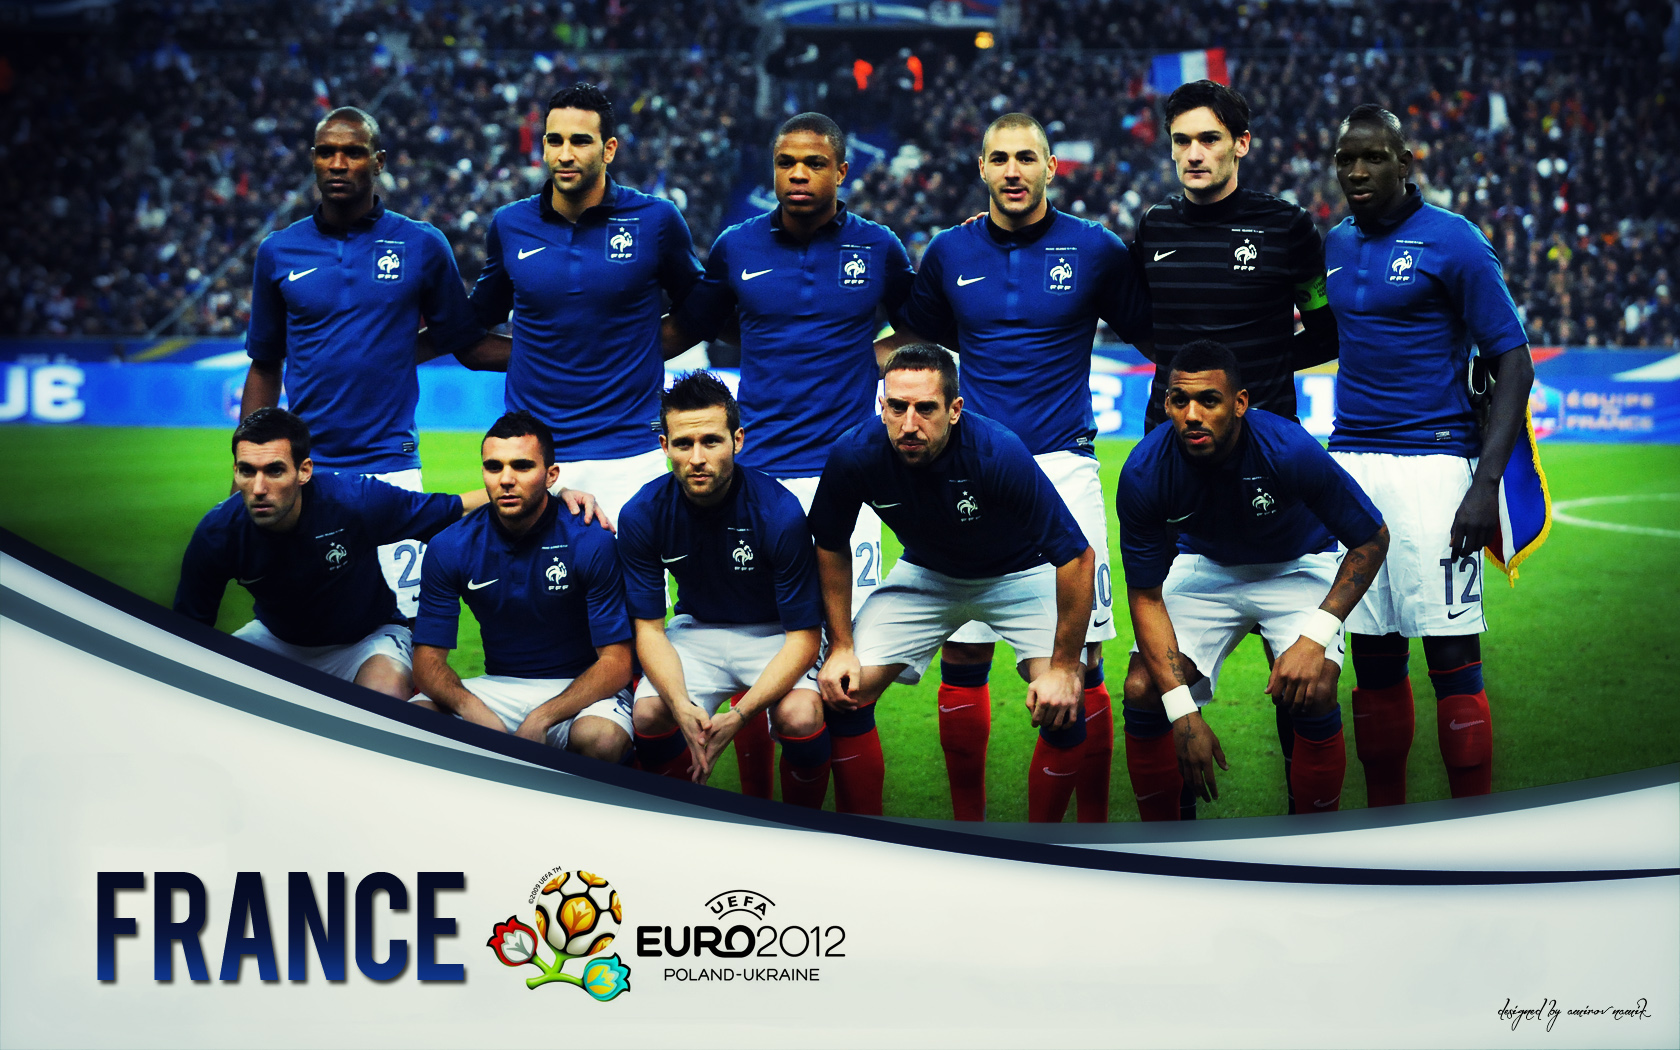 France National Football Team Picture by Namik Amirov